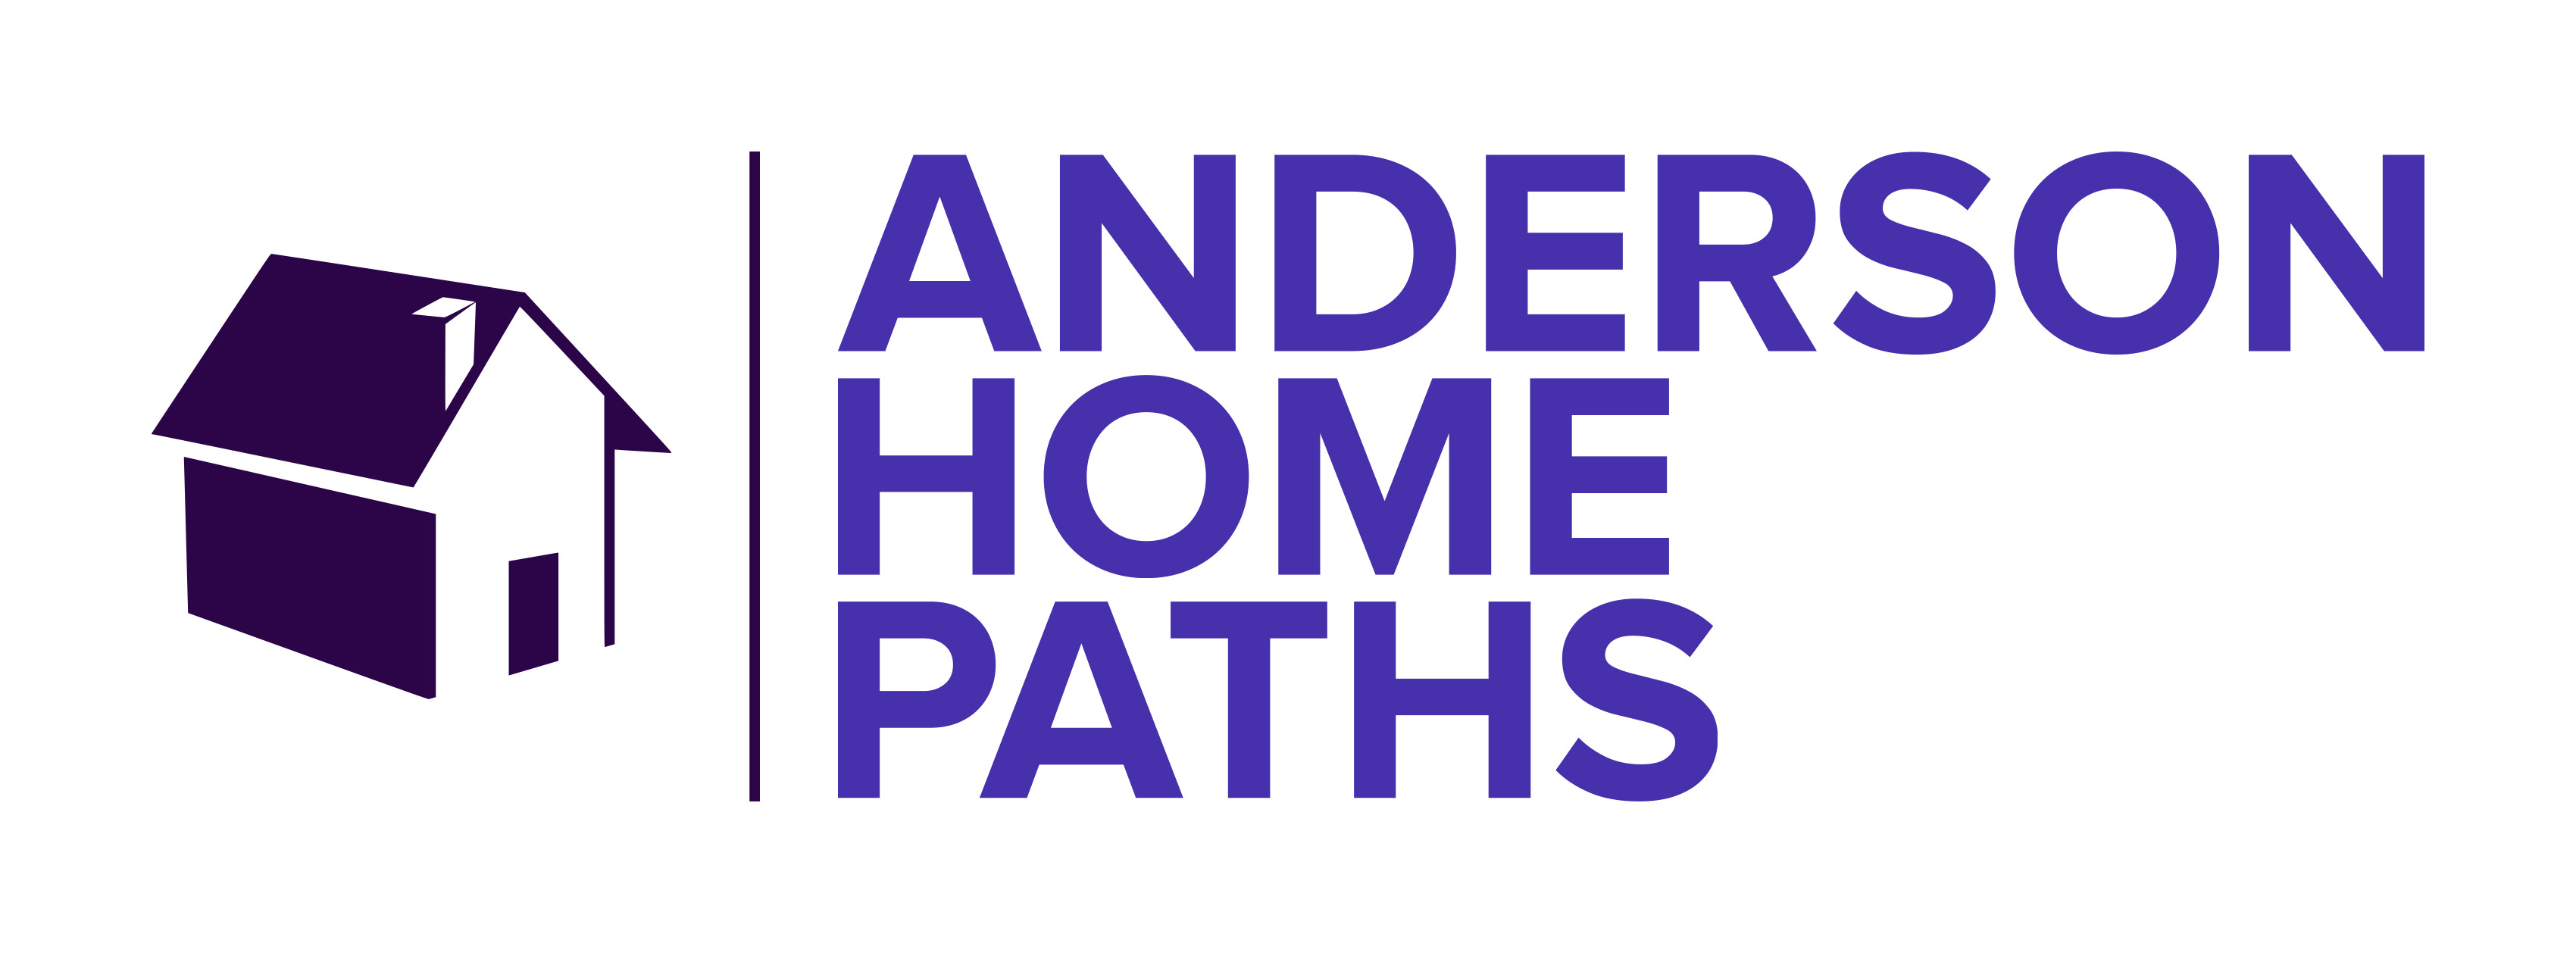 Anderson Home Paths